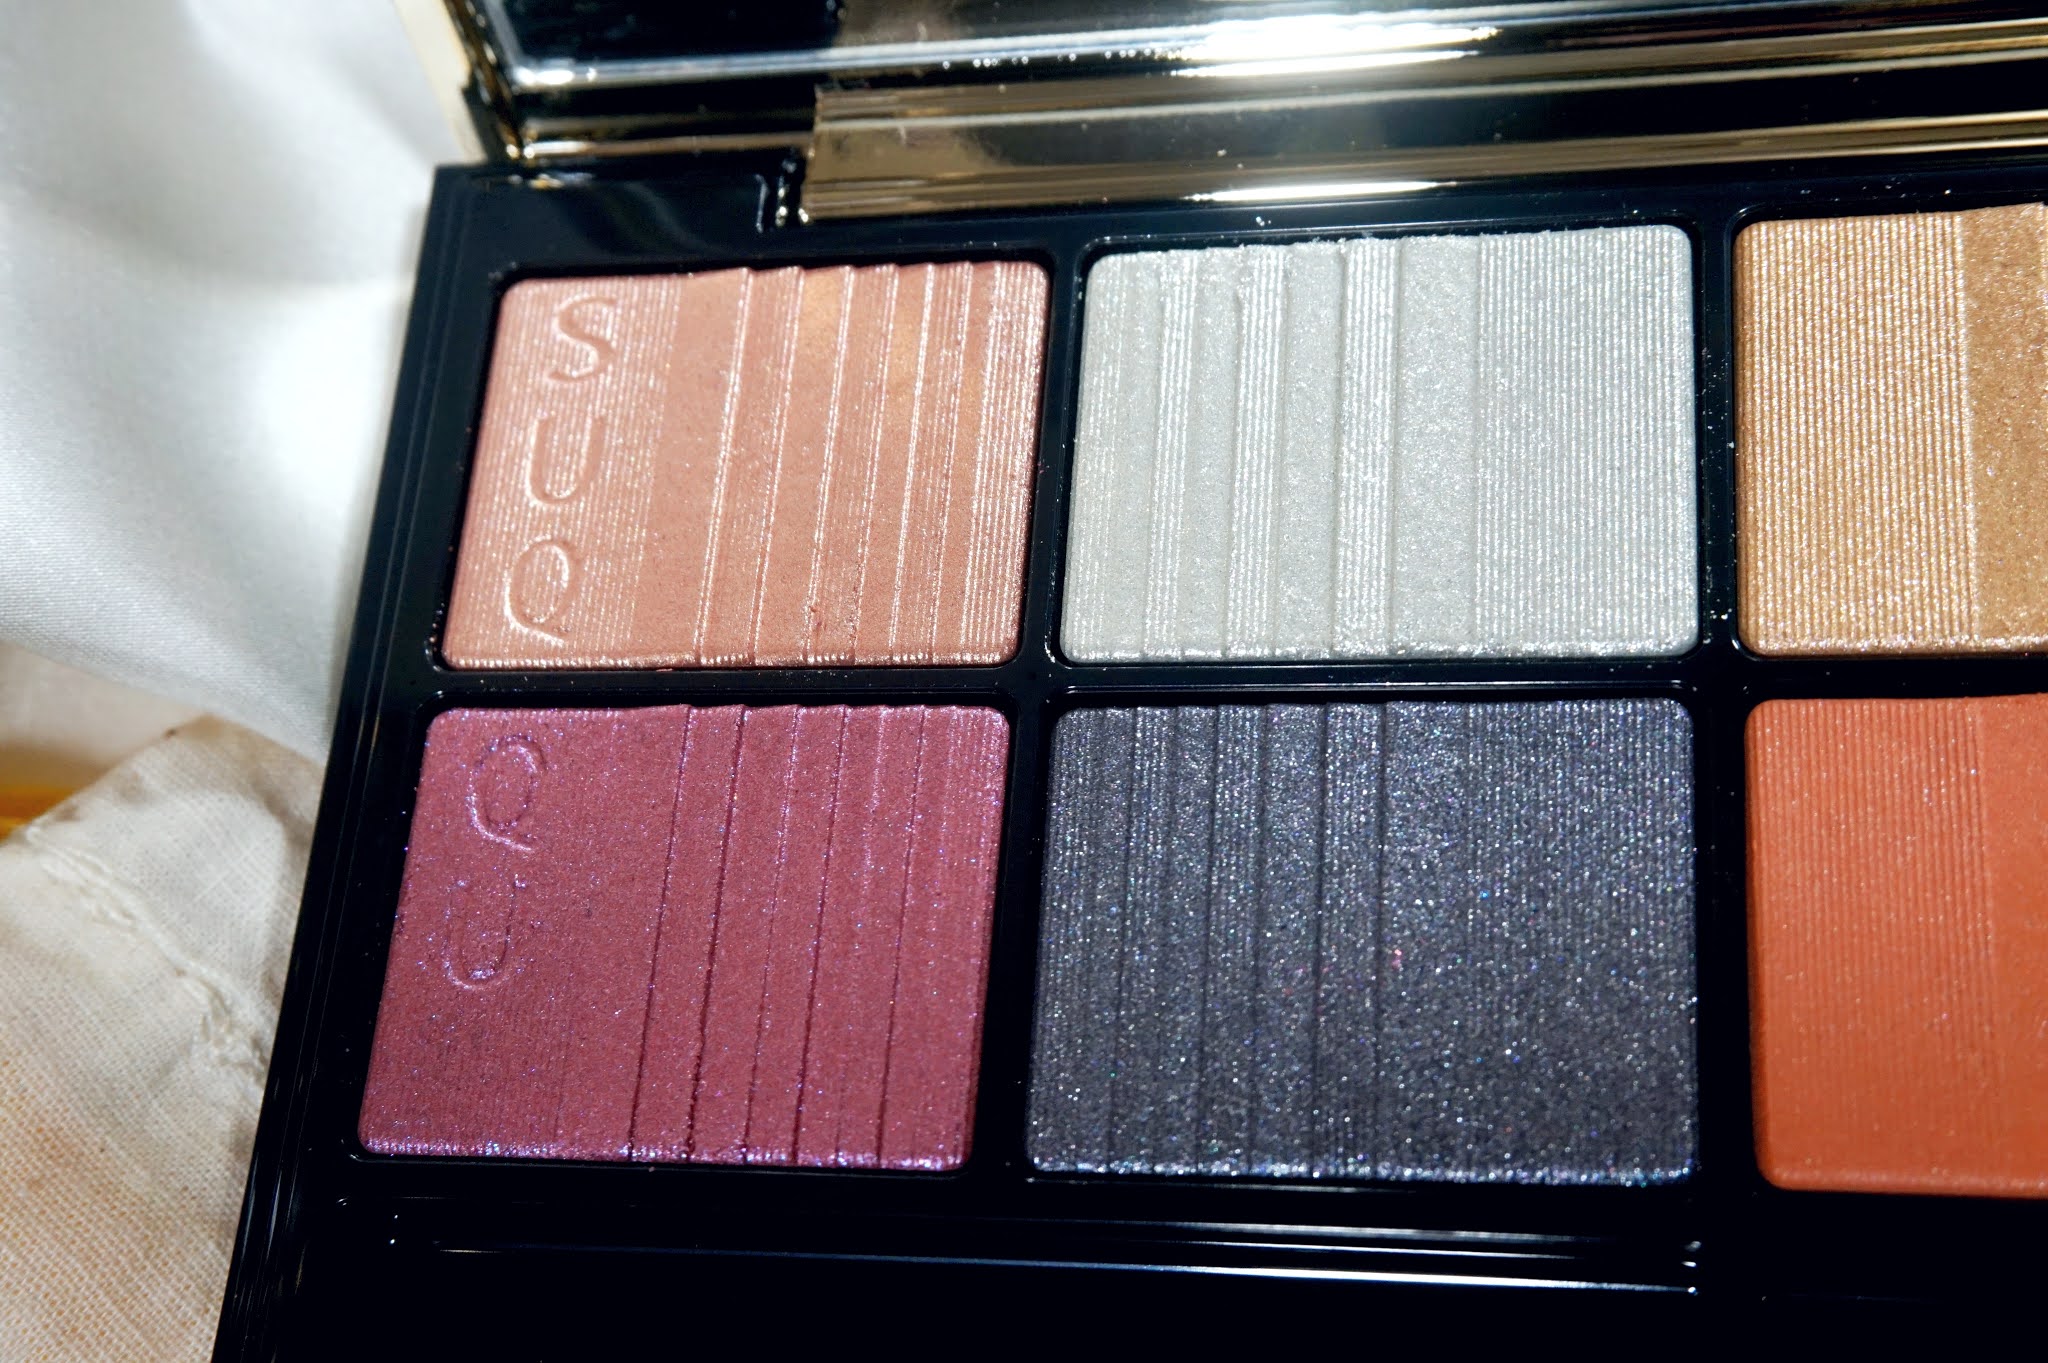 SUQQU 2020 Holiday Eyeshadow Palette Review and Swatches